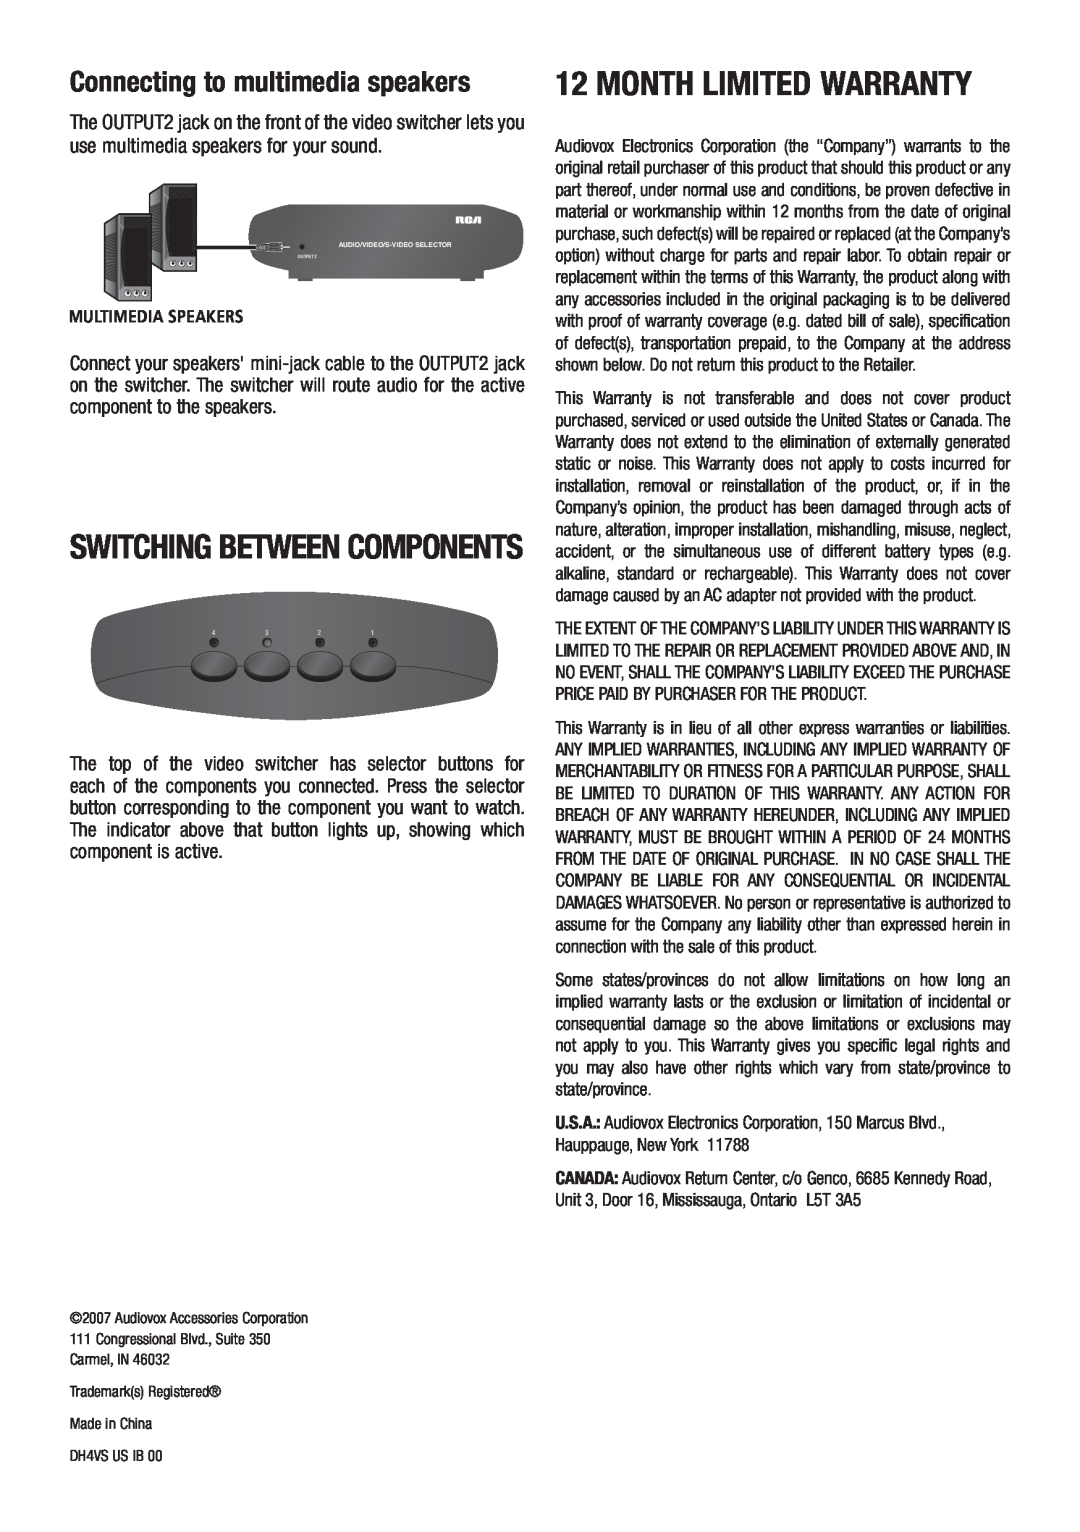 RCA DH4VS Switching between components, Month Limited Warranty, Connecting to multimedia speakers, Multimedia Speakers 